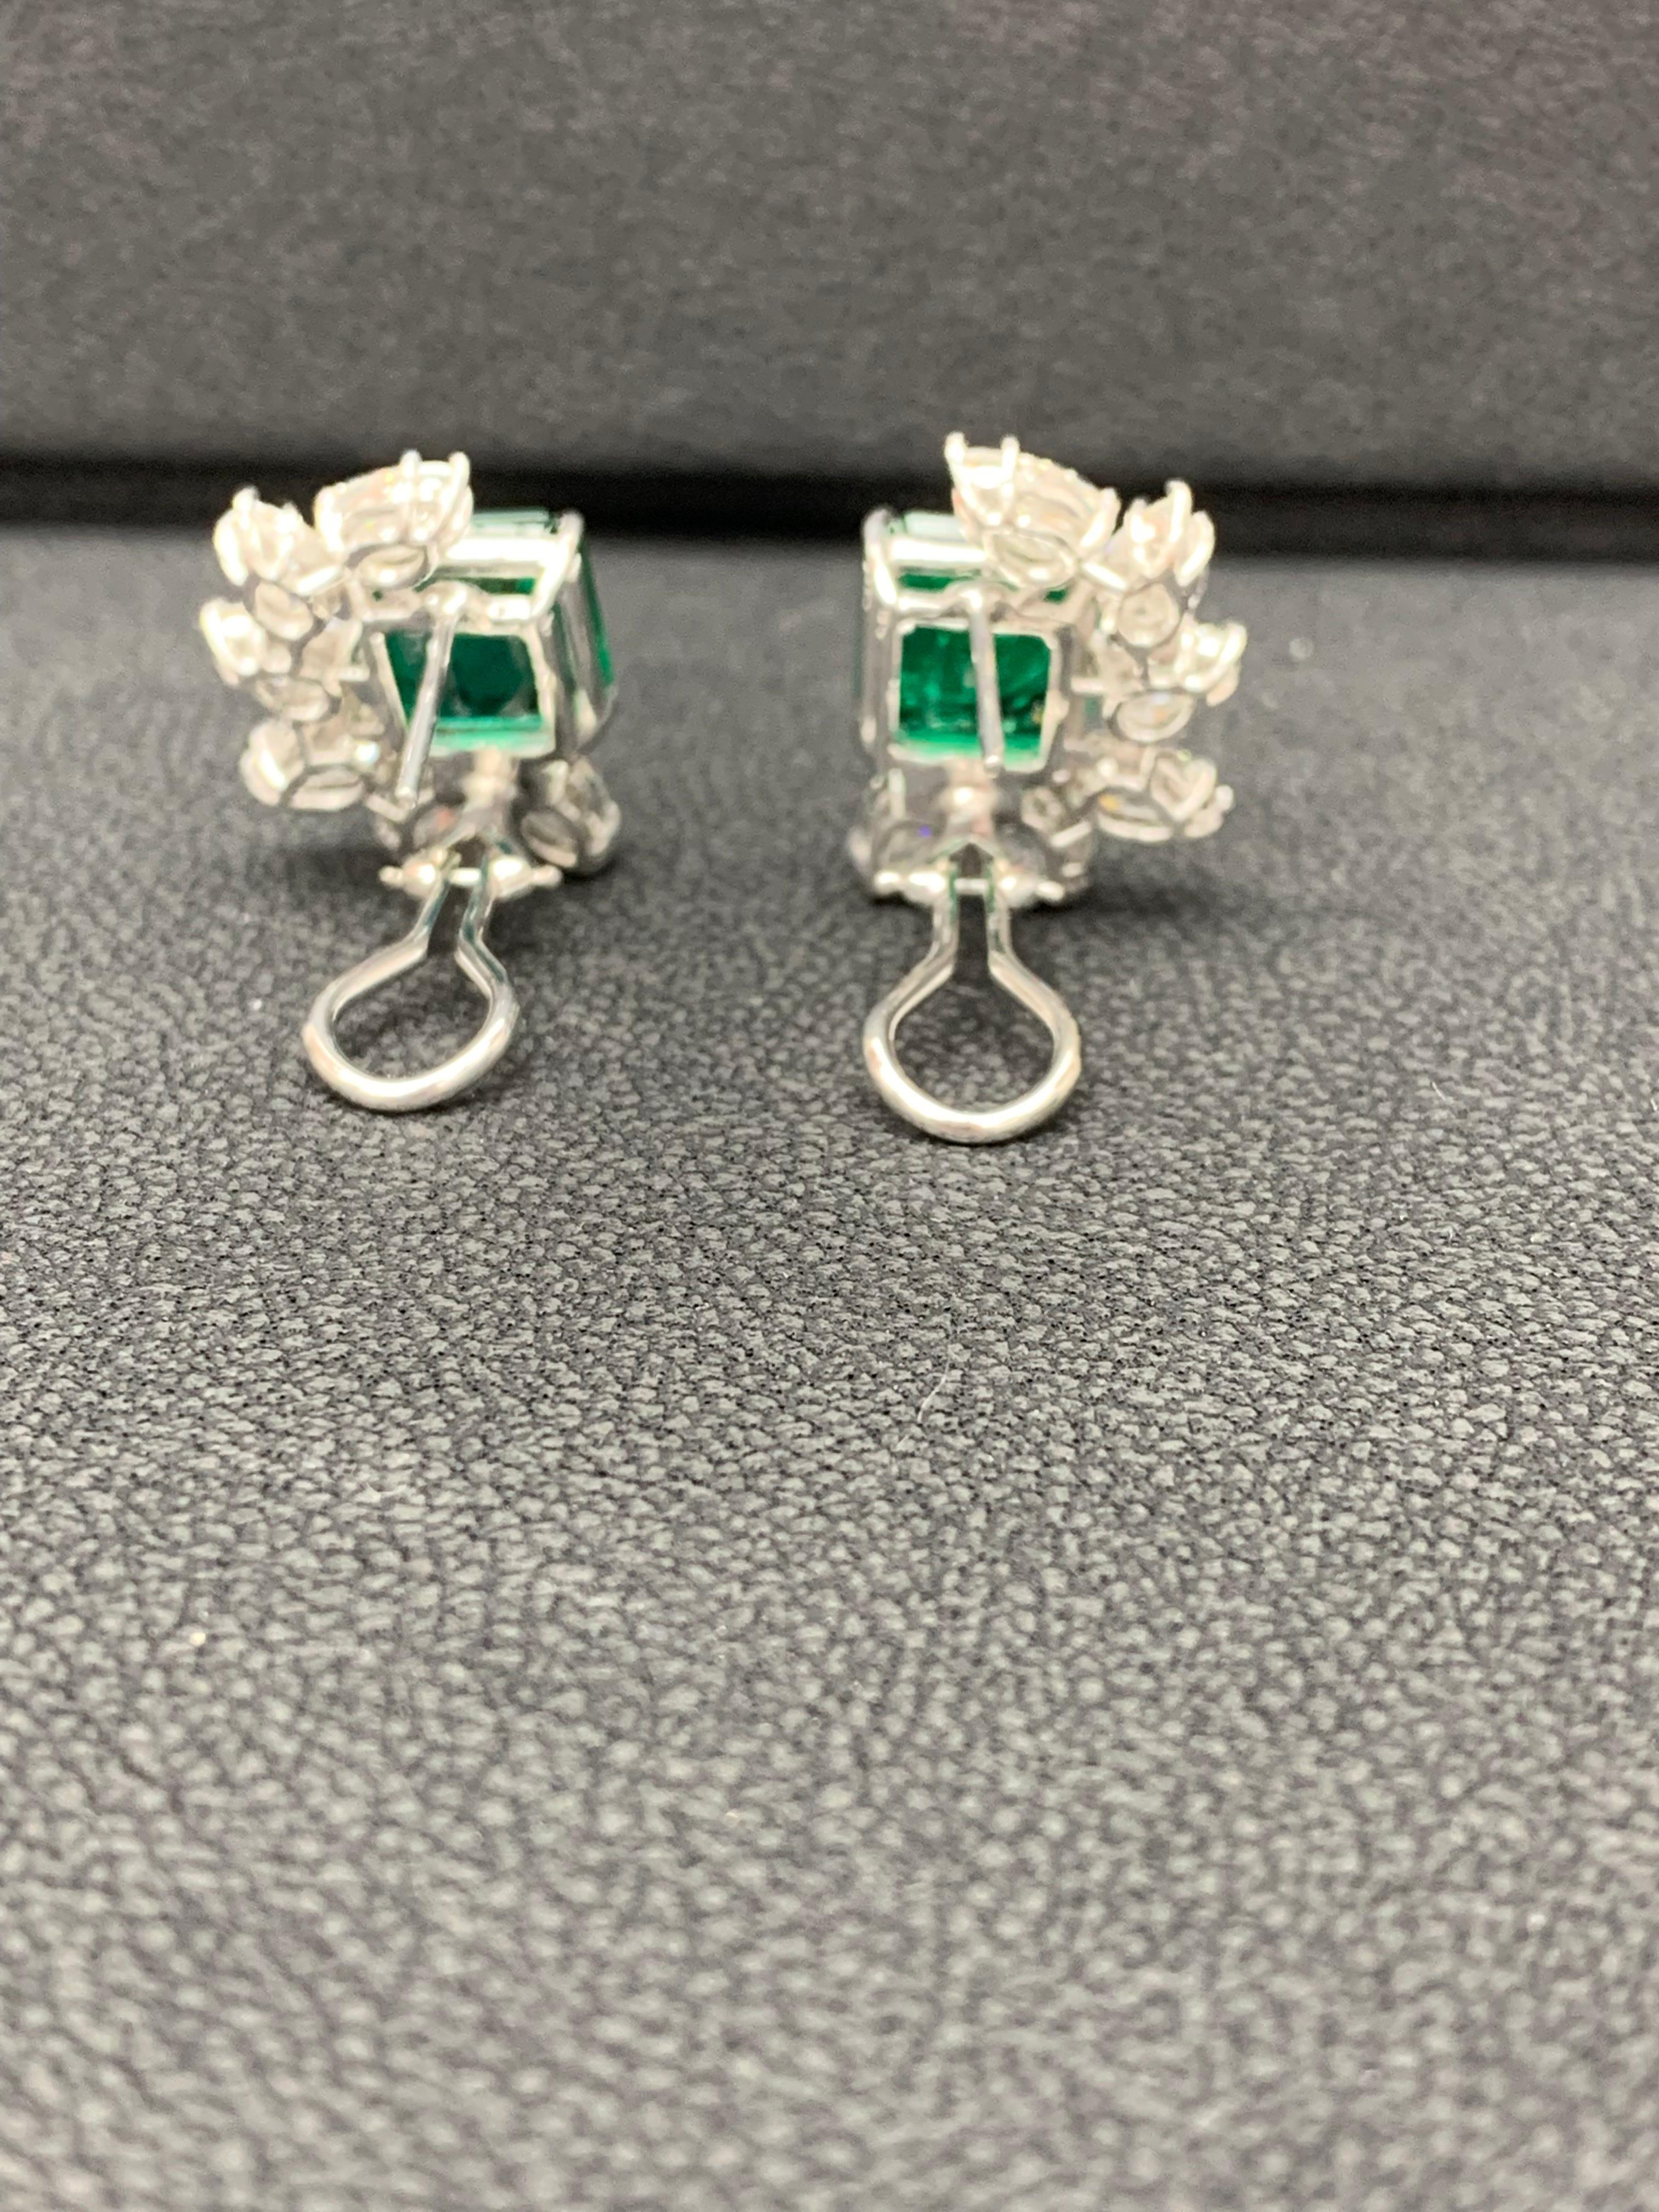 Certified 7.82 Carat Emerald Cut Emerald and Diamond Cluster Earrings in 18K  For Sale 8